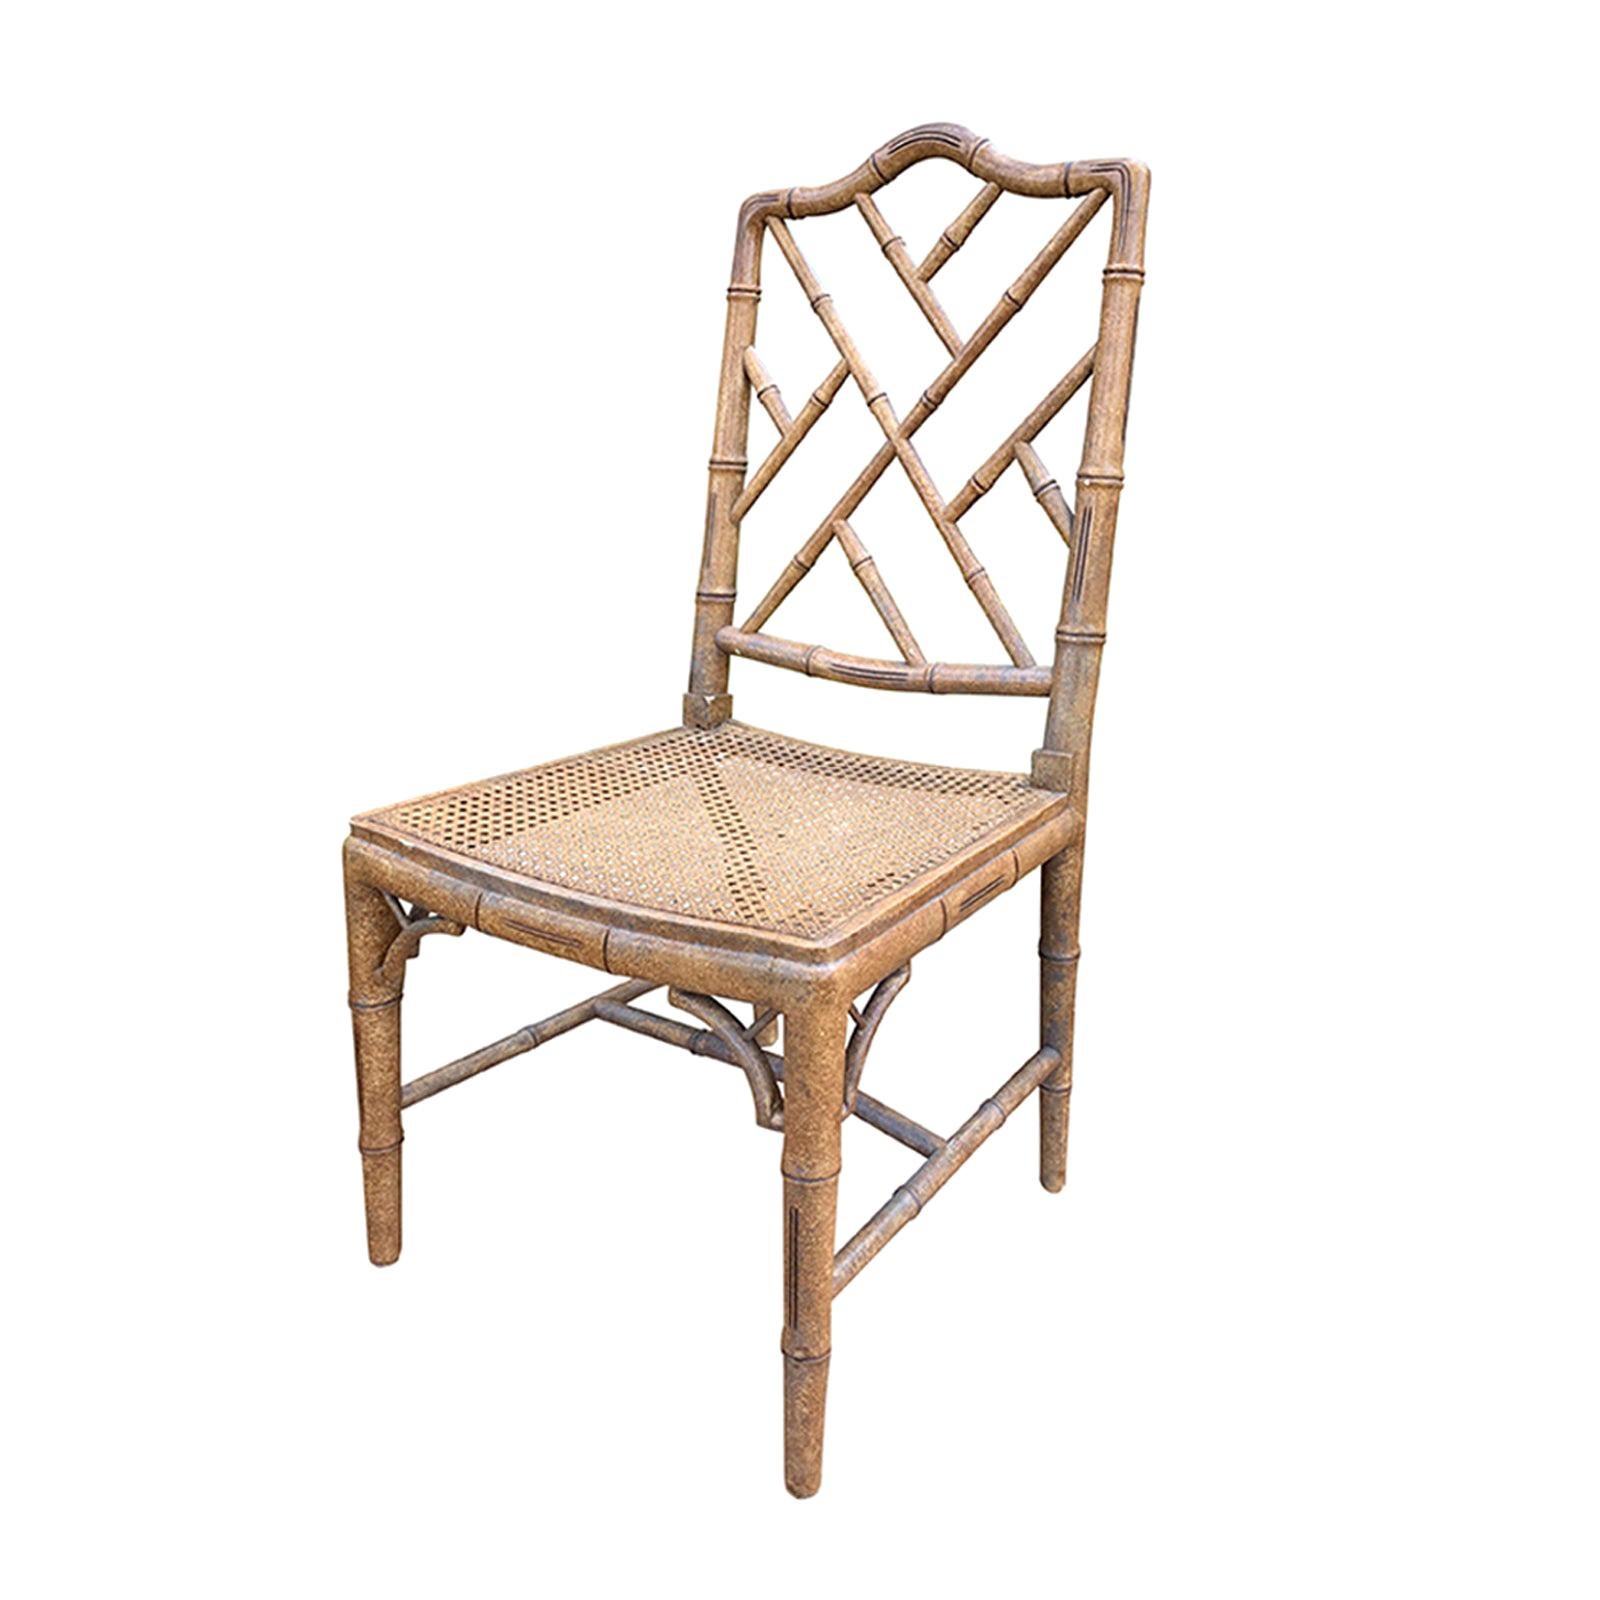 Mid-20th Century Faux Bamboo Side Chair with Cane Seat